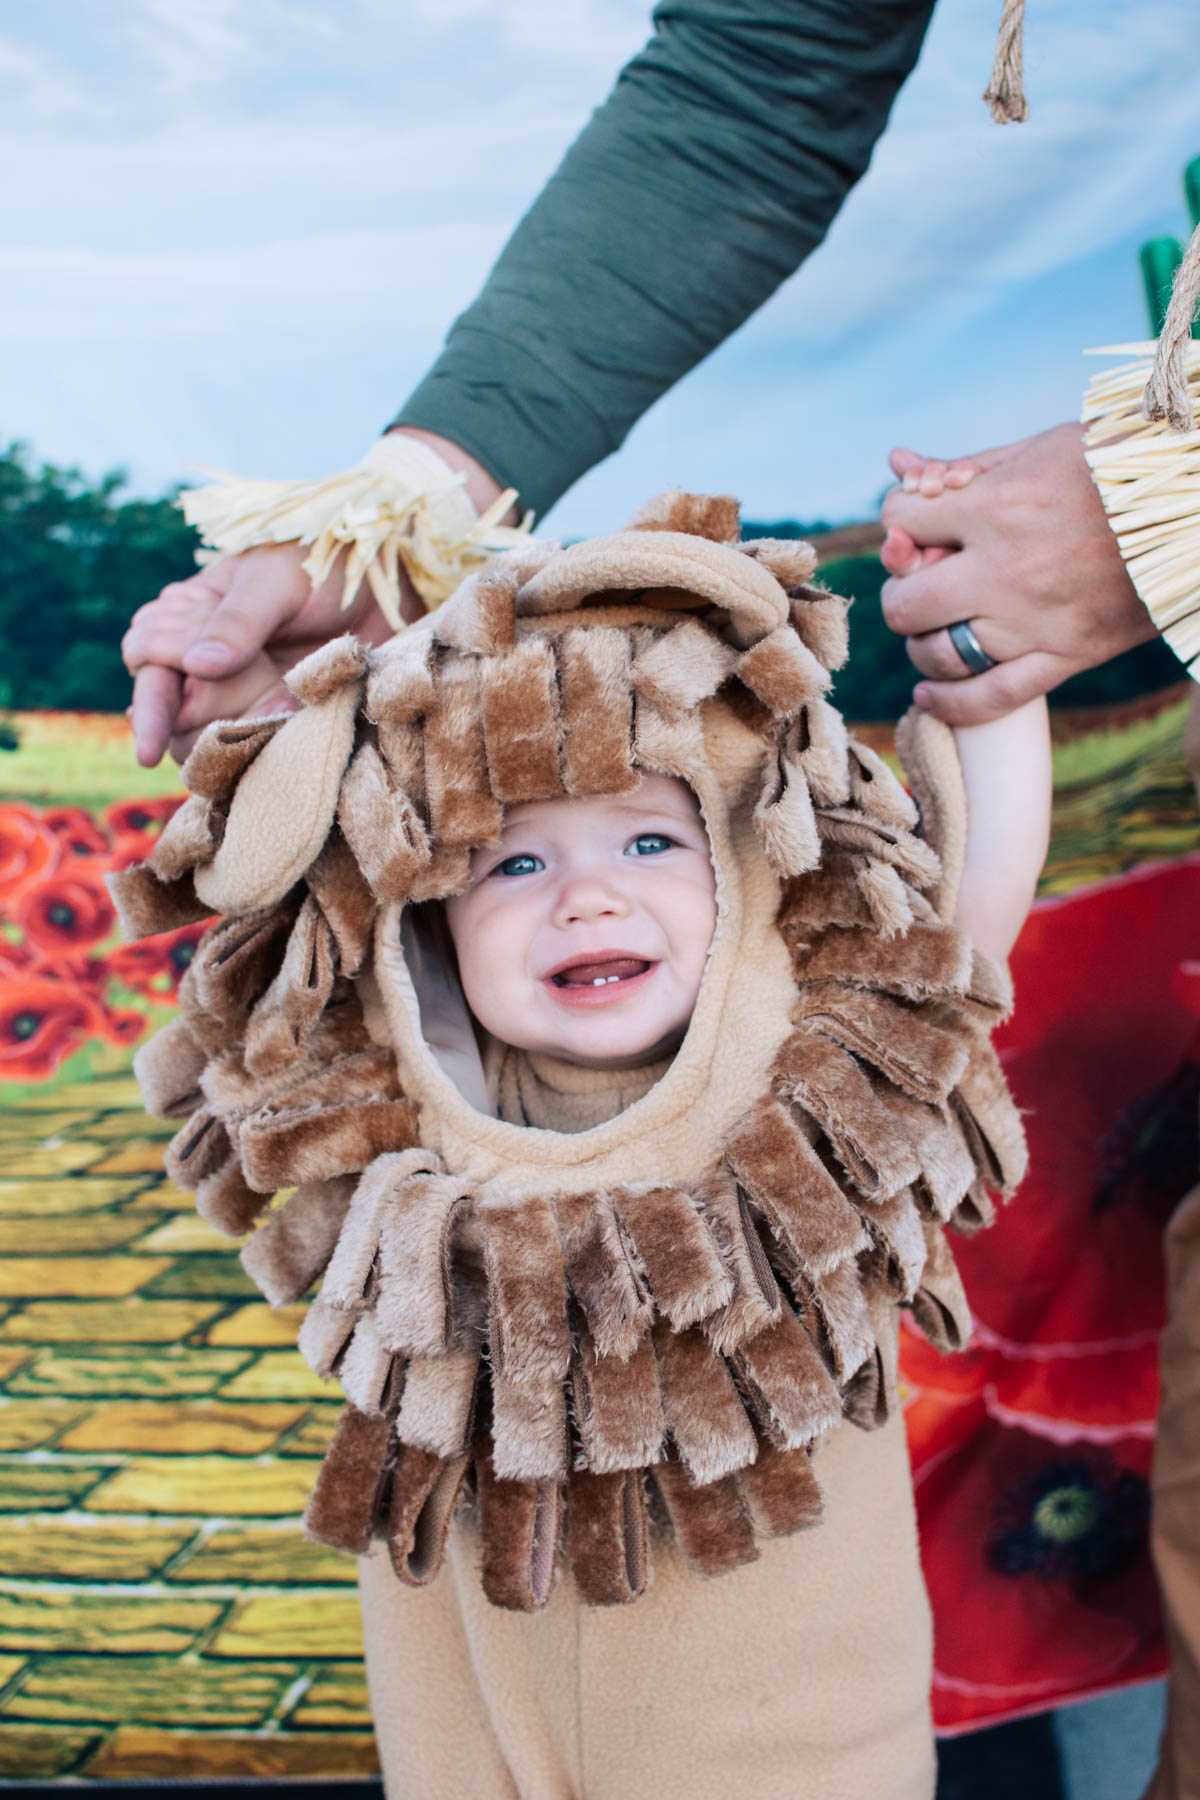 Man holds baby girl wearing Cowardly Lion costume in front of yellow brick road.